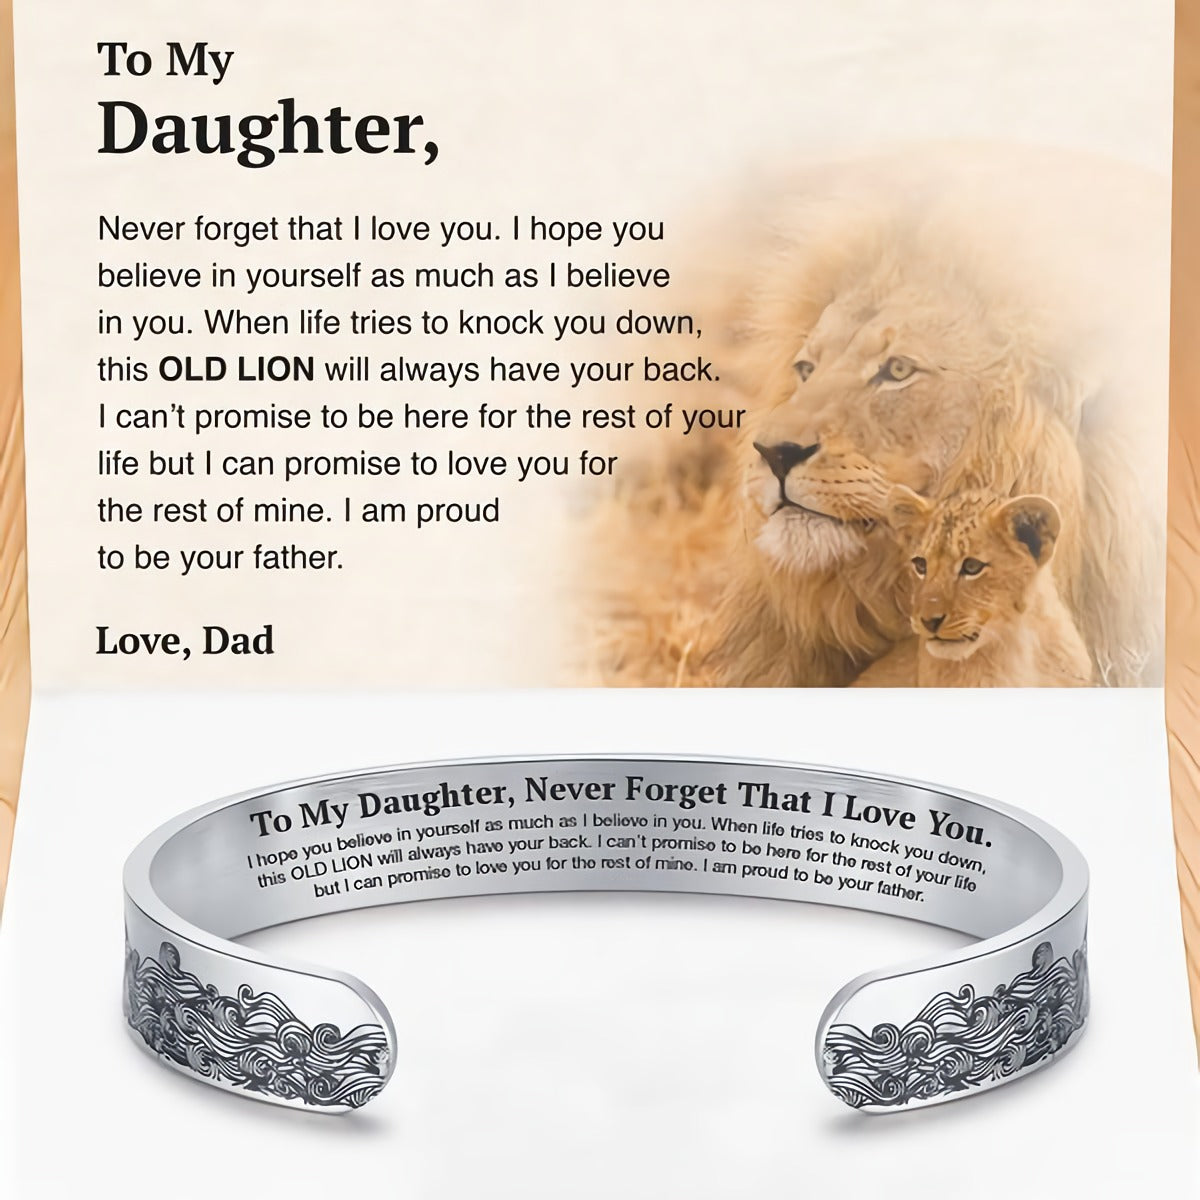 To My Daughter Proud of You Love Dad Cuff Bracelet Graduation Birthday Gift